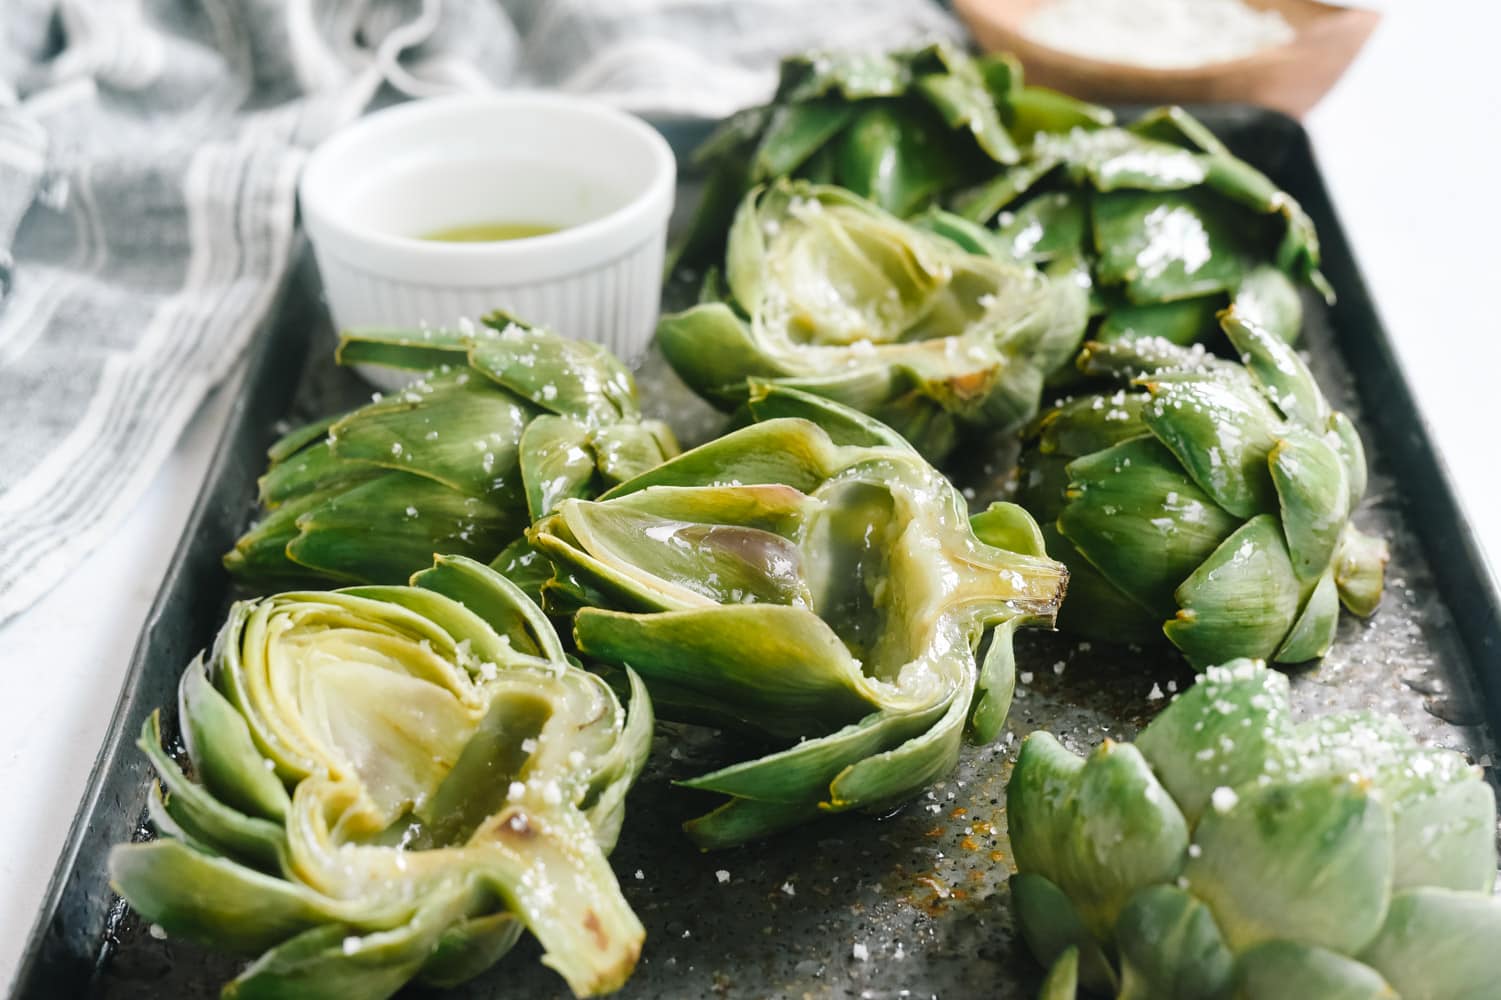 Artichokes ready for grilling